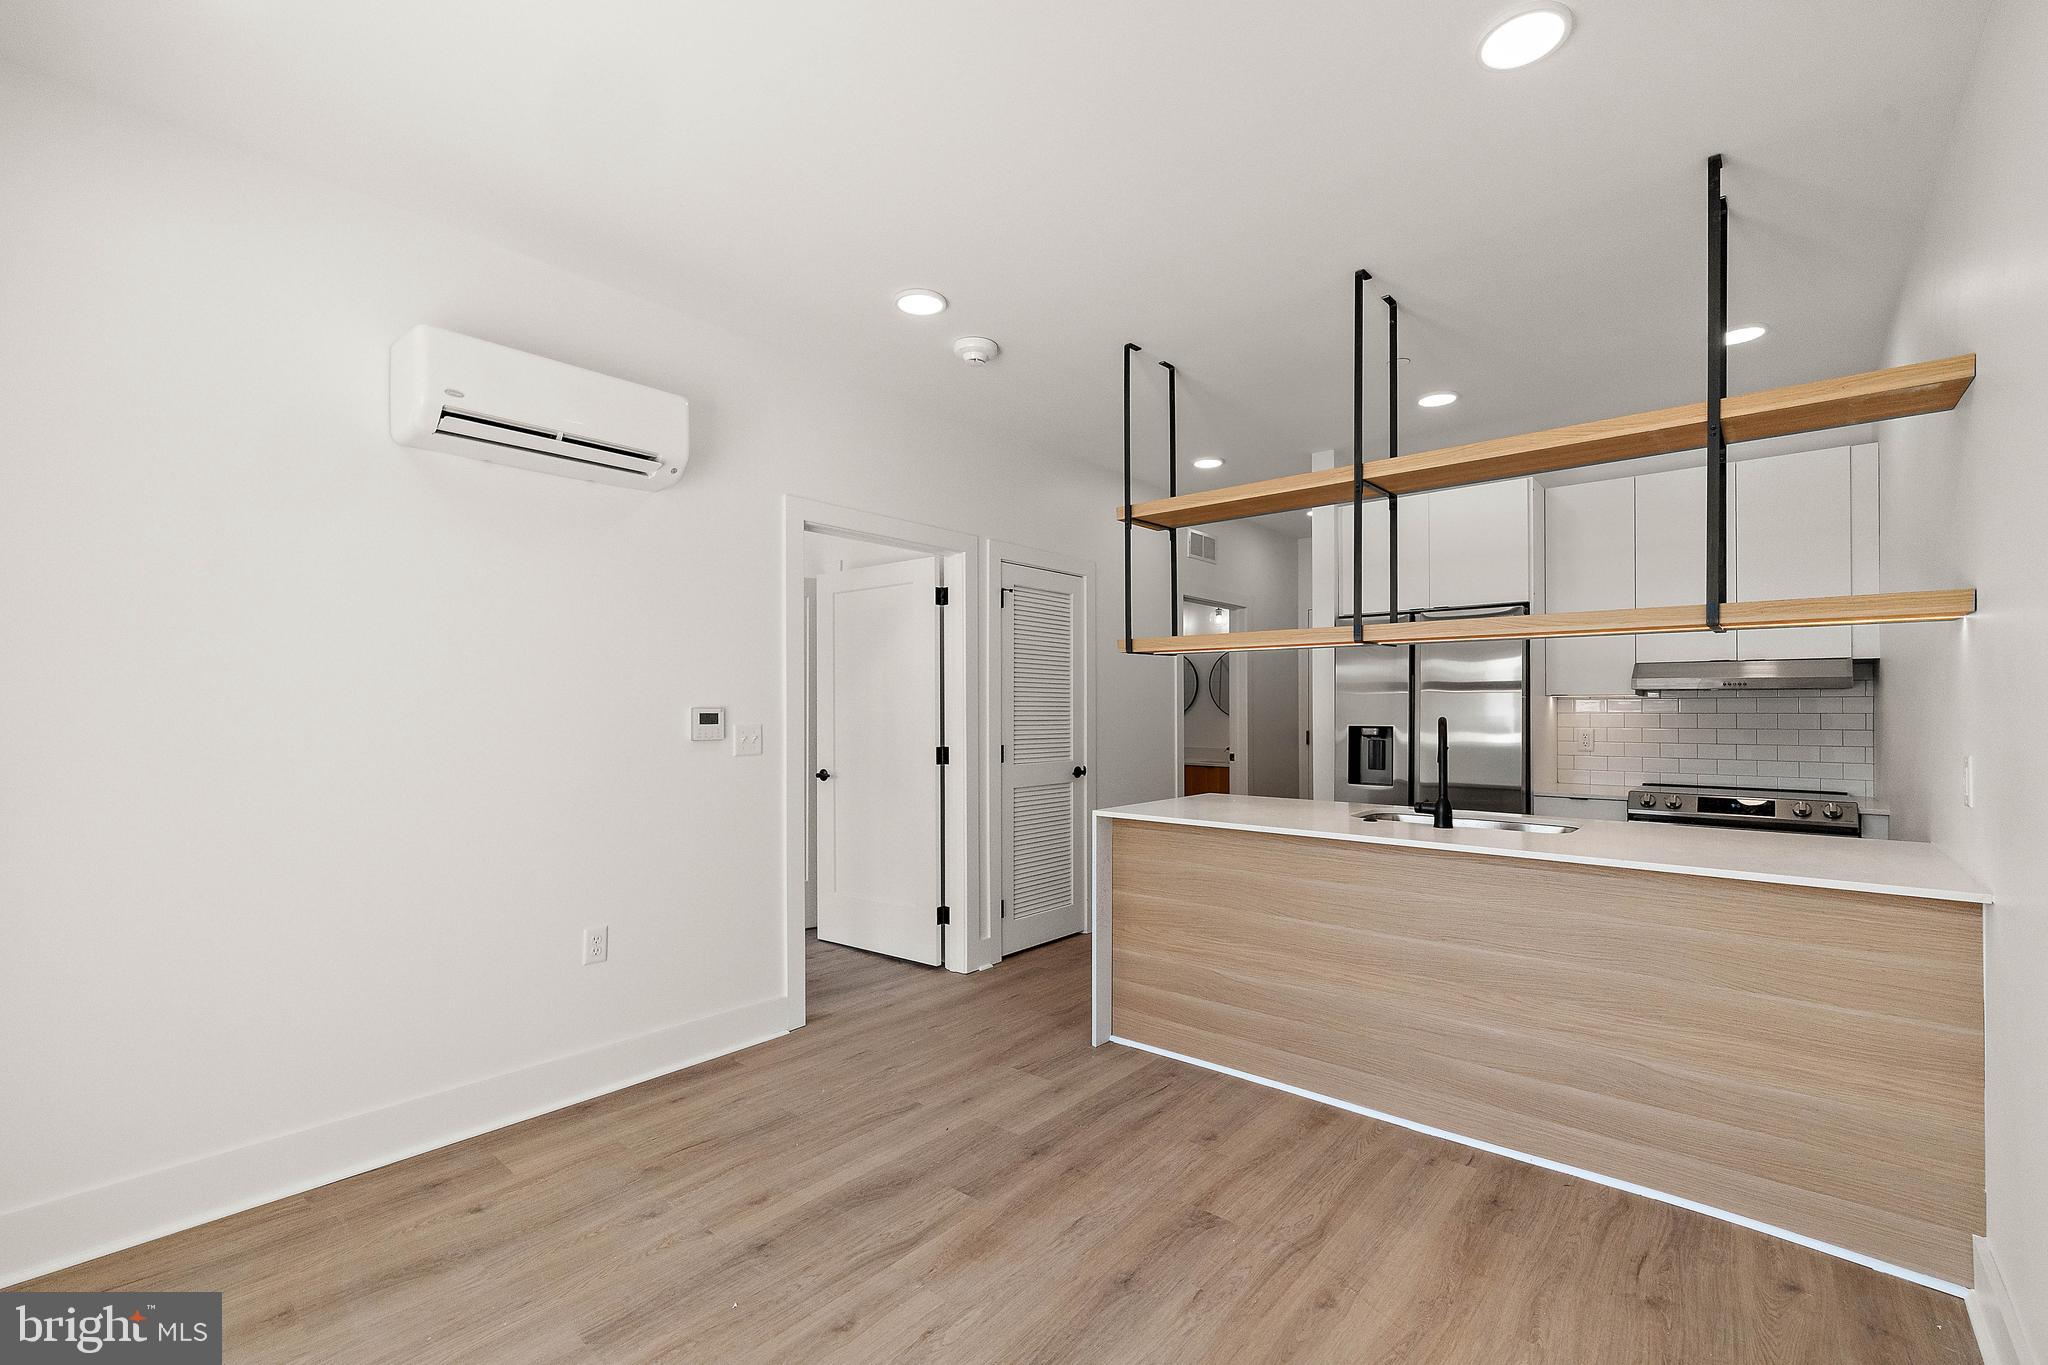 a view of kitchen with stainless steel appliances refrigerator and wooden floor